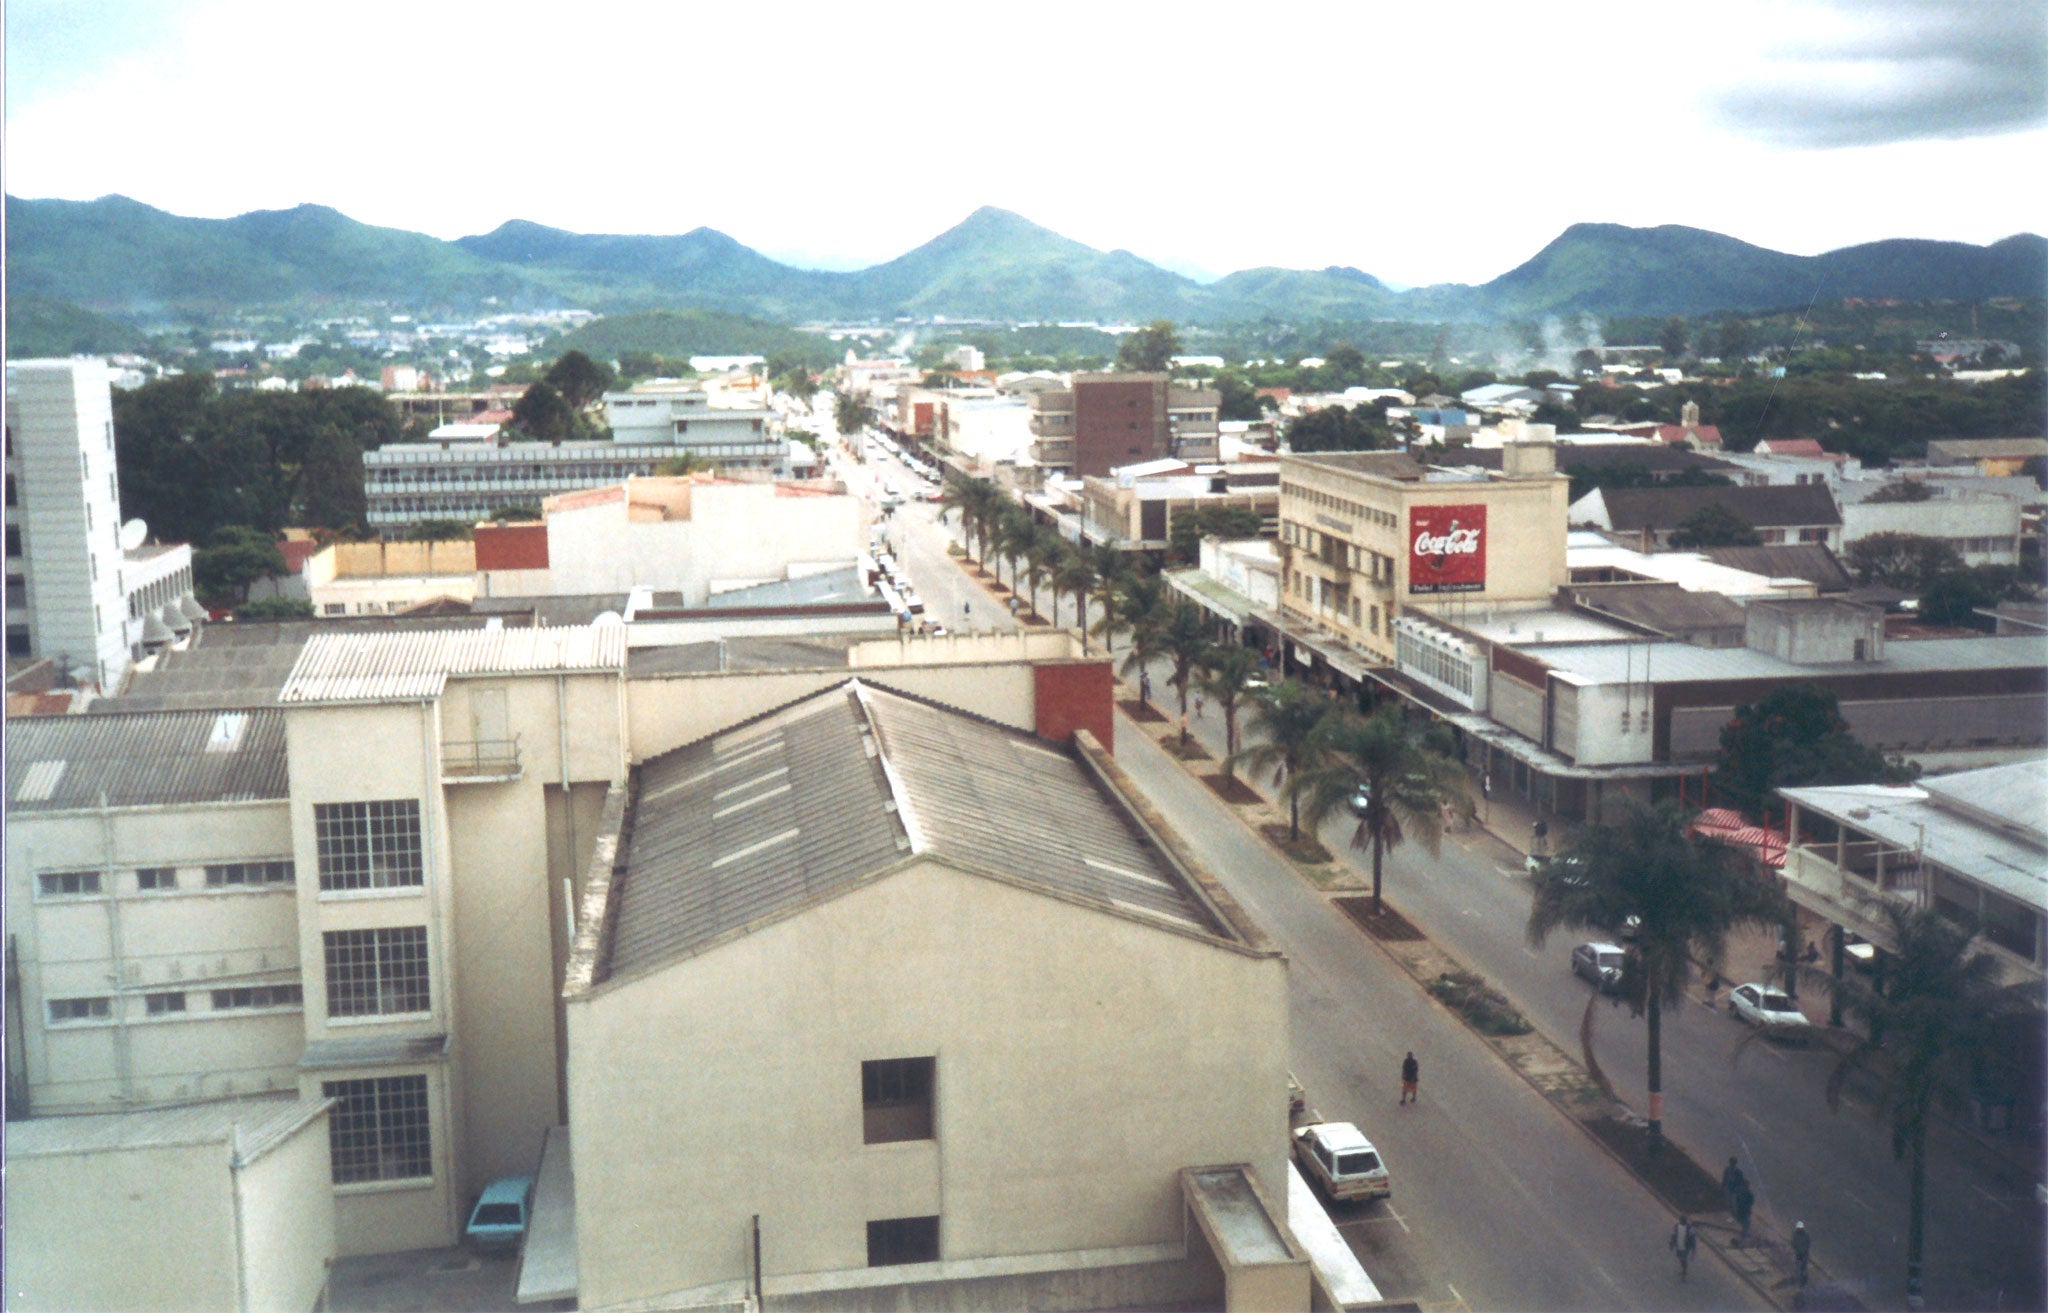 The incident took place in the Zimbabwean city of Mutare